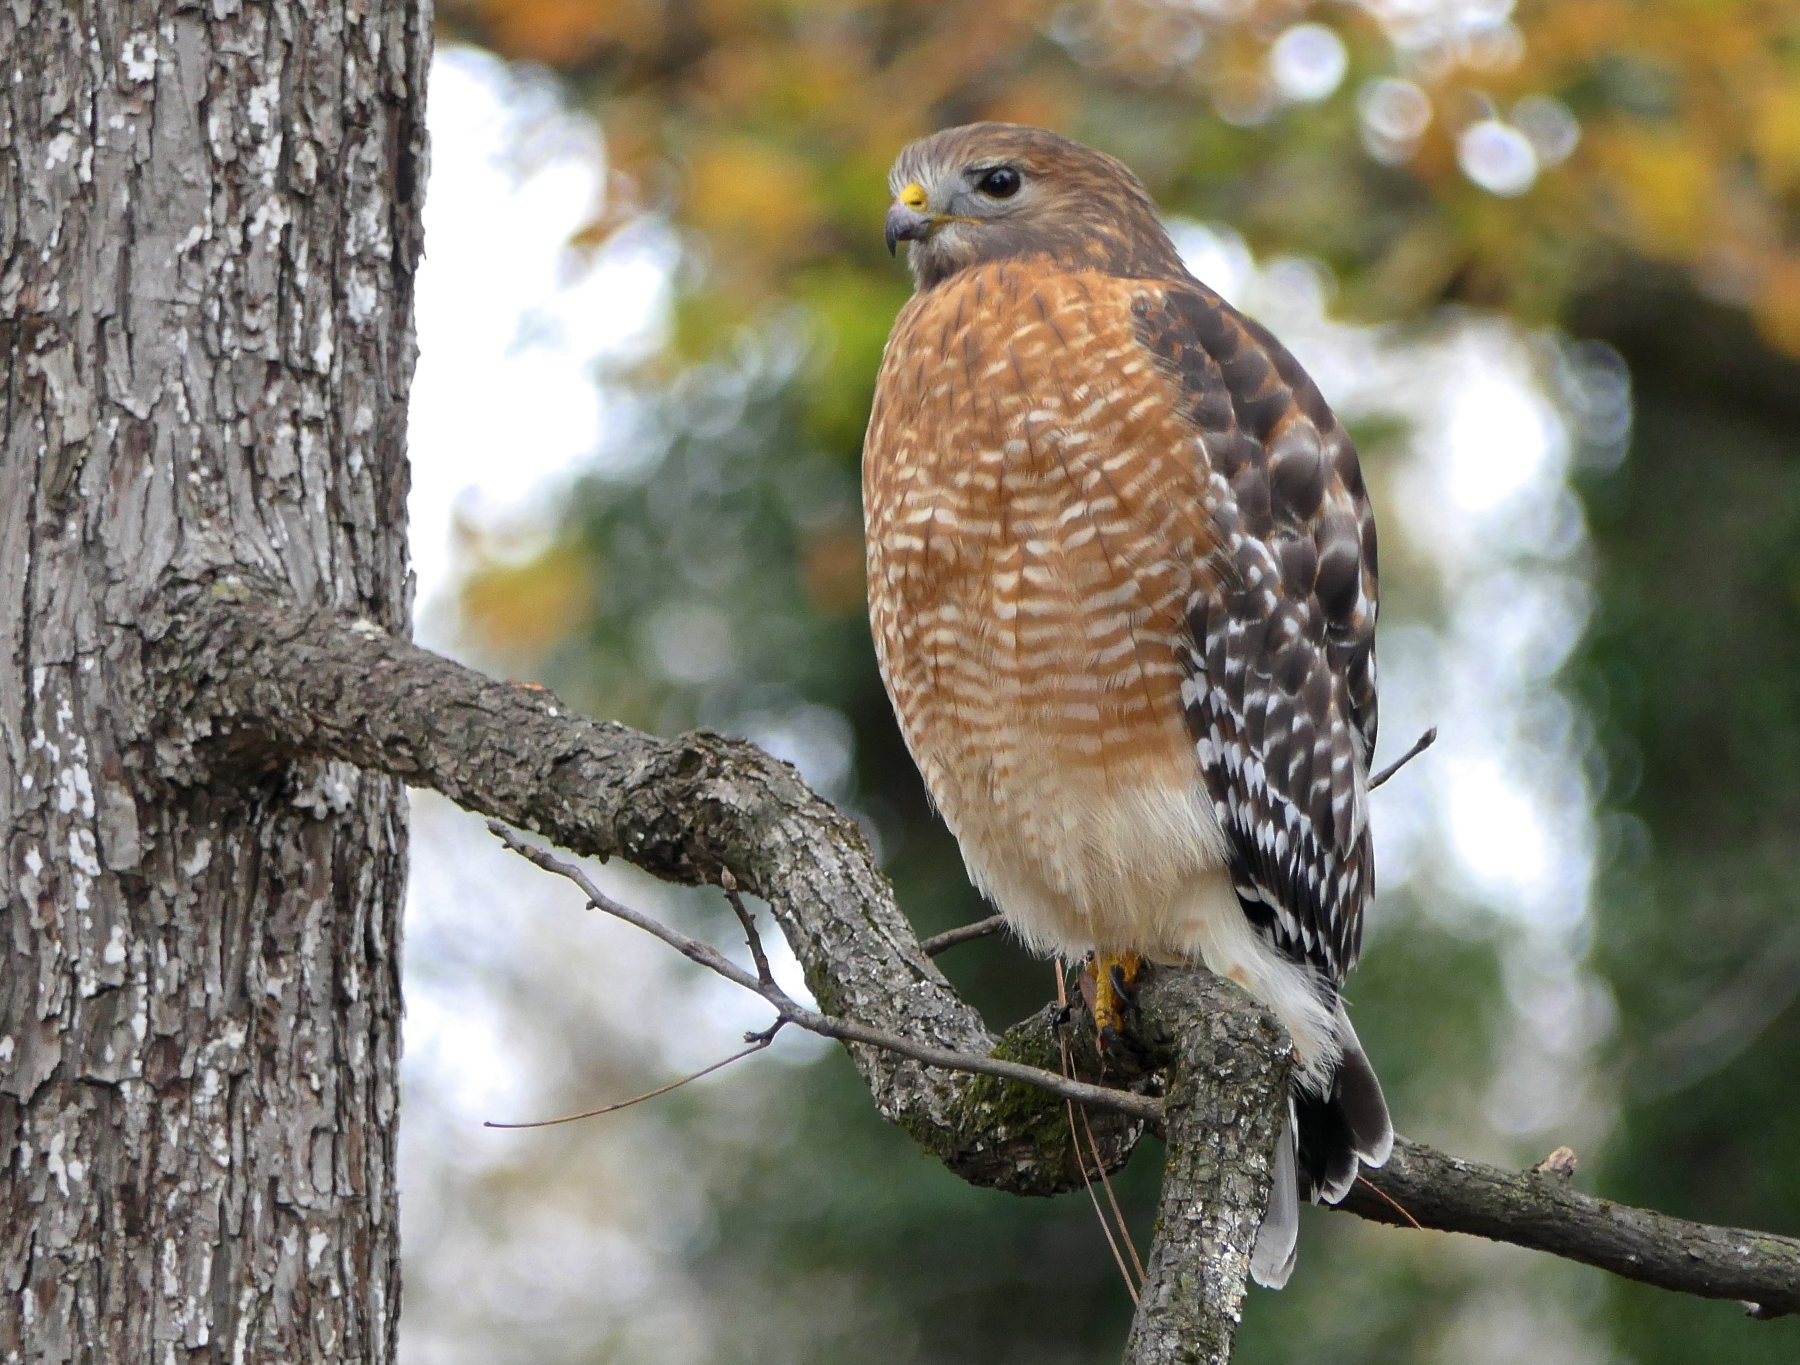 A Red-Shouldered Hawk perched on a tree branch.